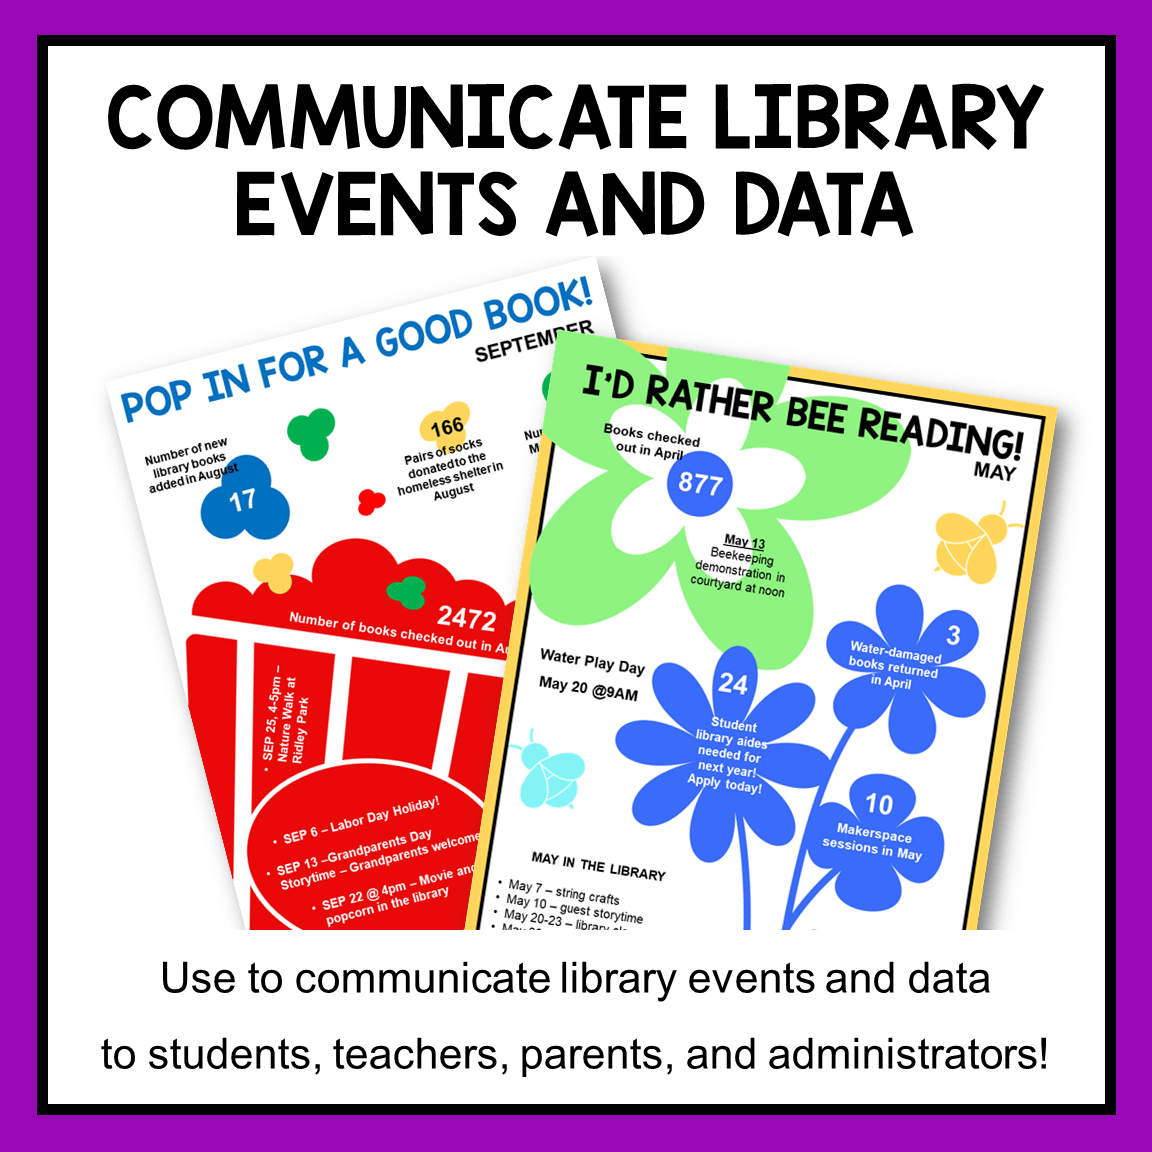 This is the second set of Library Infographics. Share events and library statistics with the library community.